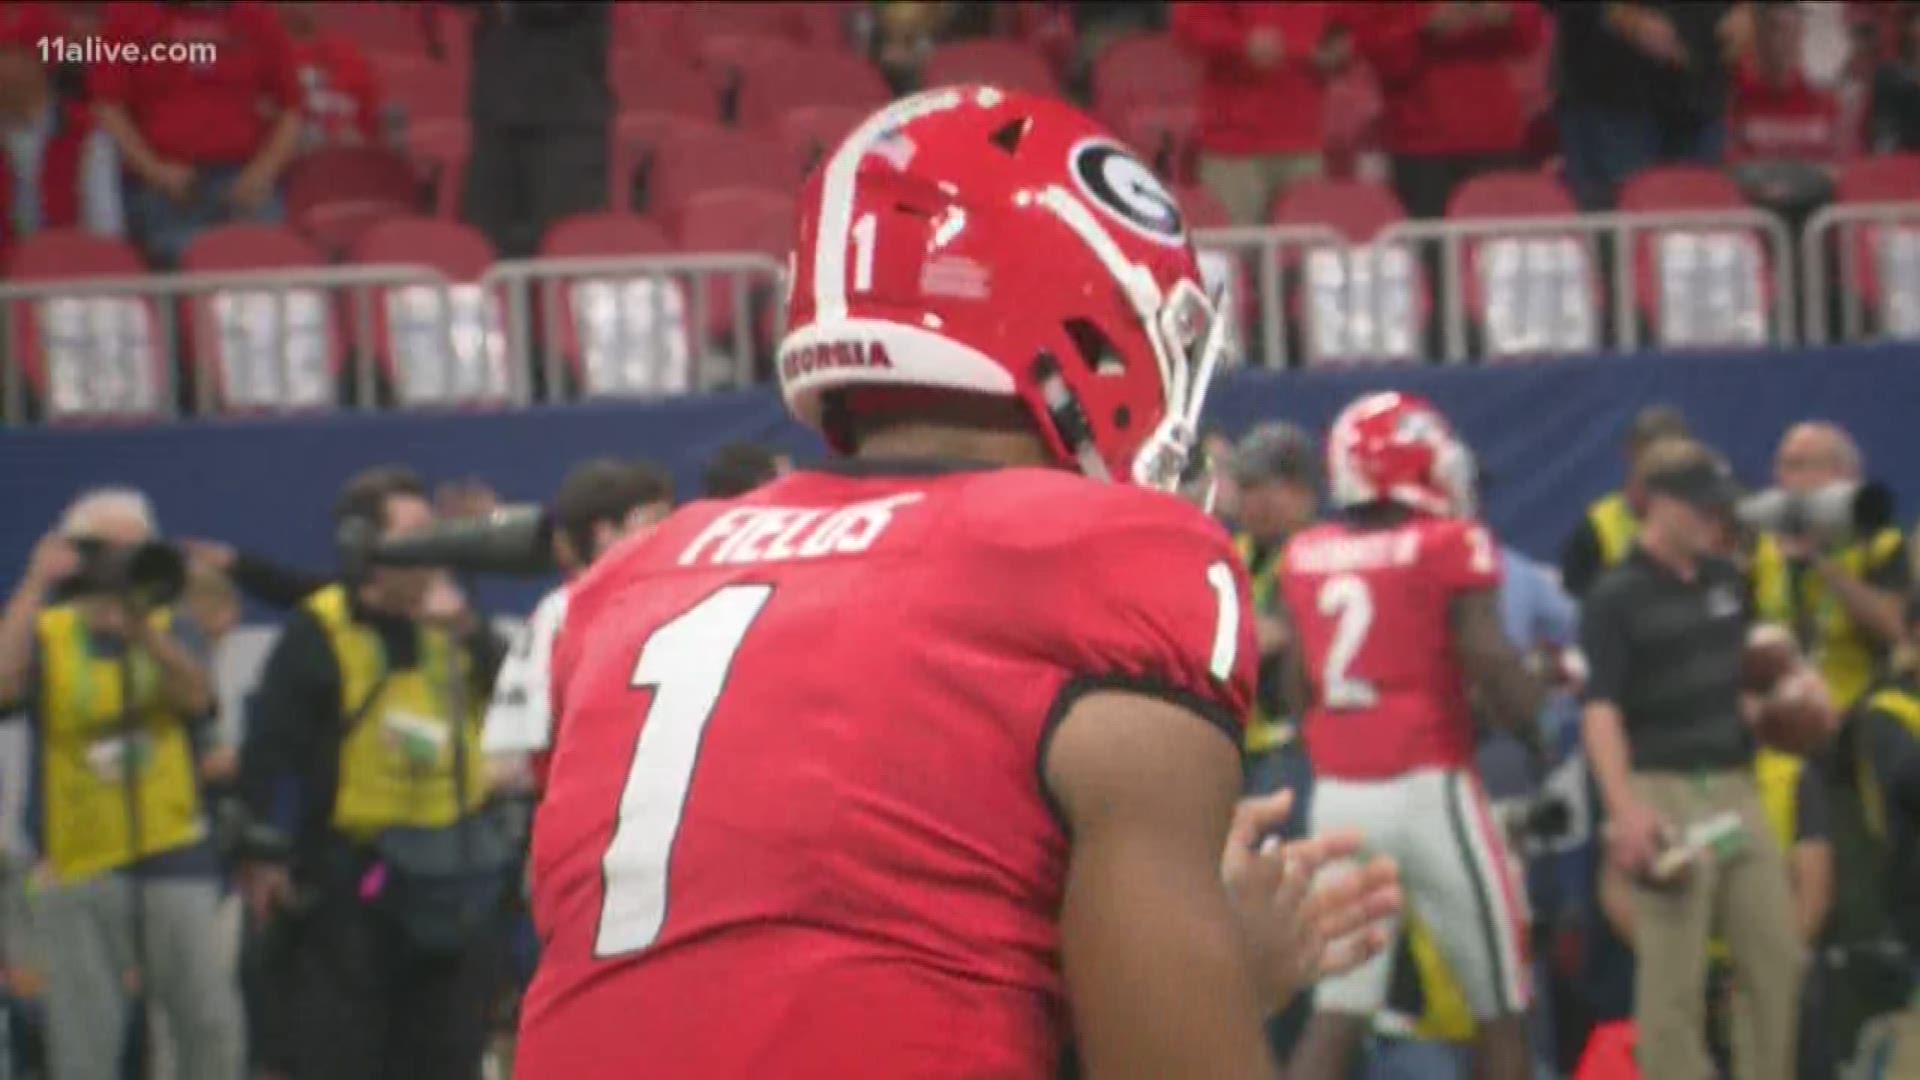 In a bombshell report from USA TODAY Sports, UGA quarterback Justin Fields apparently plans to transfer from the Bulldogs program in the coming weeks.